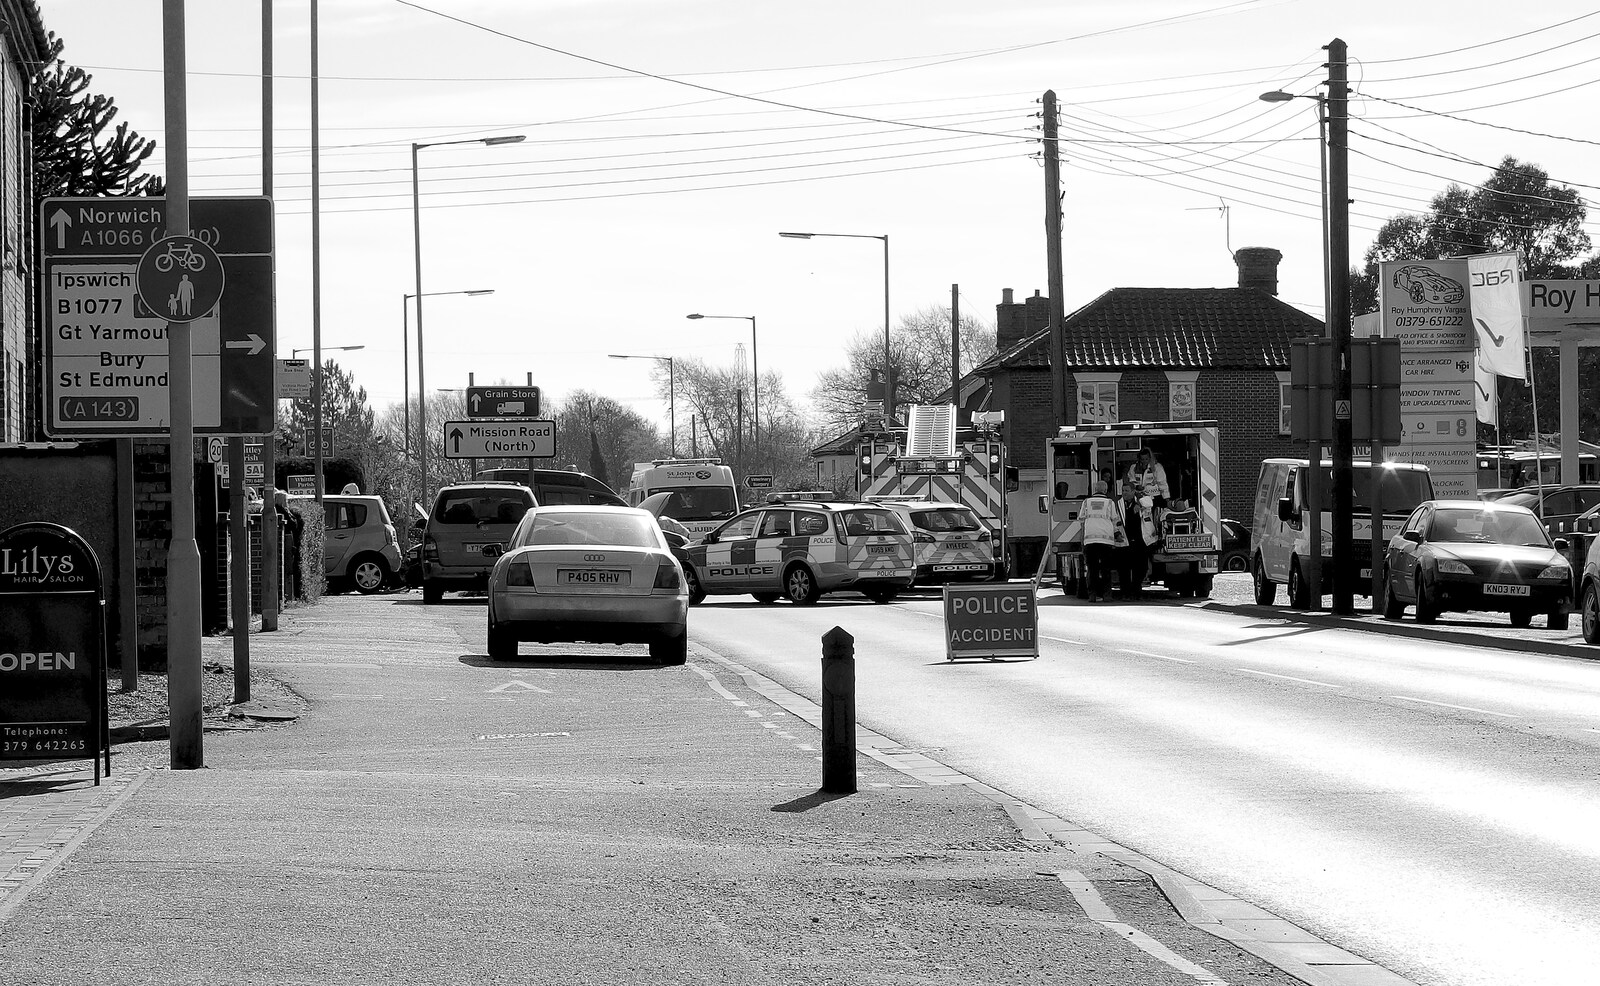 Victoria Road is completely closed from The BSCC at The Black Horse, and an April Miscellany, Thorndon, Diss and Eye, Suffolk - 10th April 2014